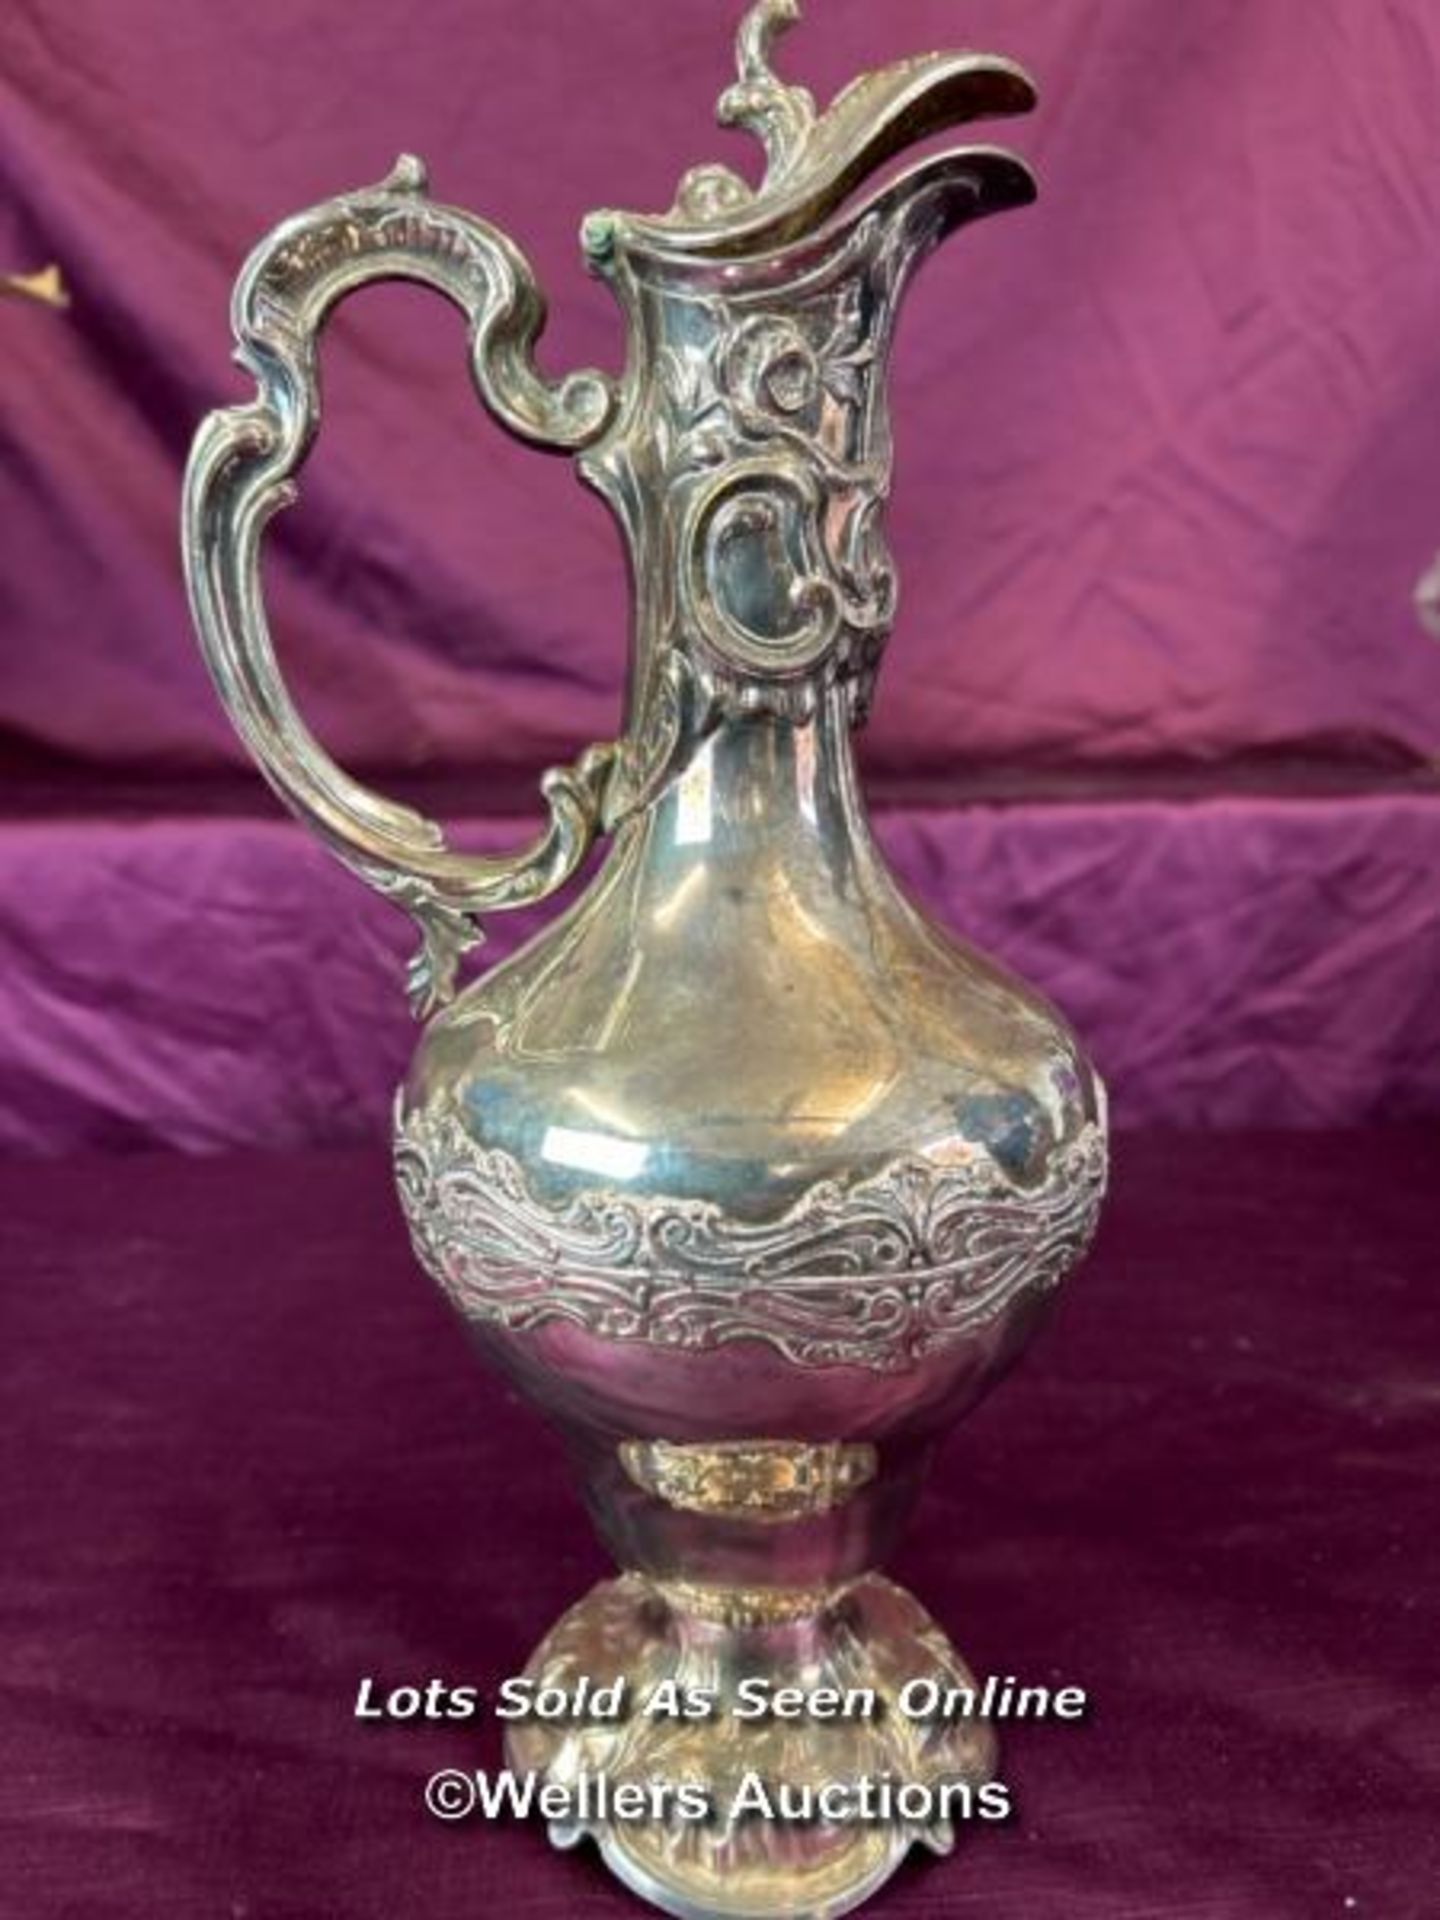 A PORTUGUESE ORNATE SILVER PLATED CLARET JUG, HEIGHT 32CM - Image 2 of 4